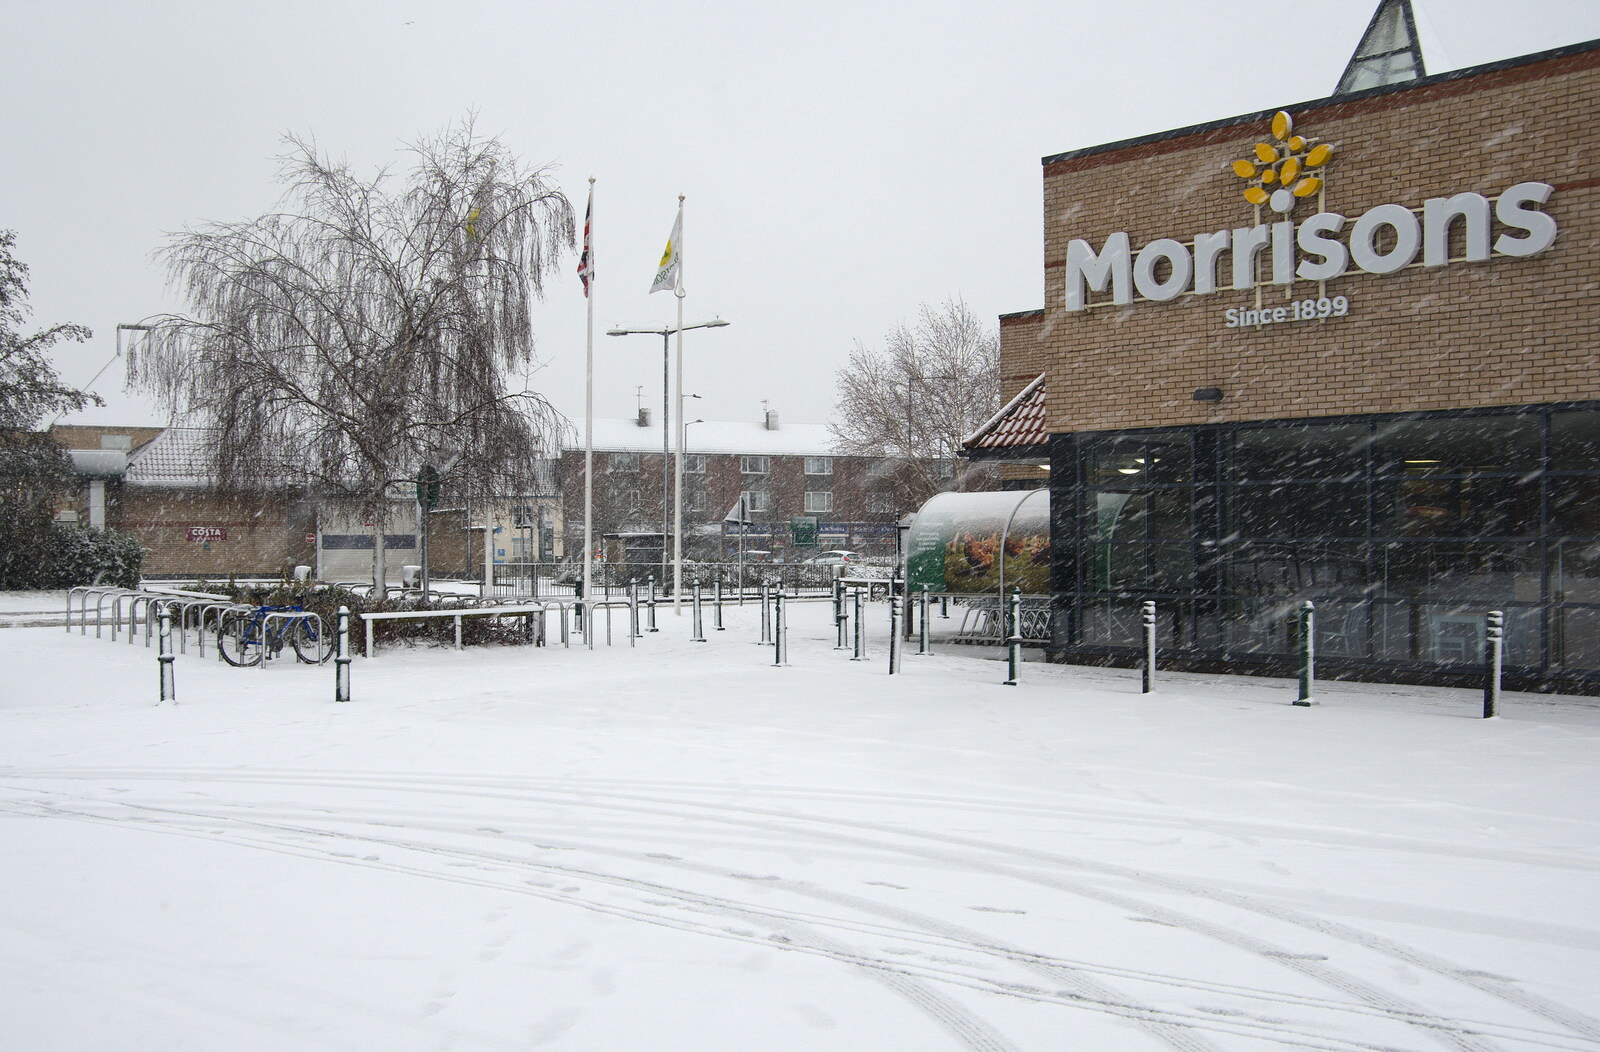 The view to Diss at Morrisons from A Snowy Morning, Diss, Norfolk - 16th January 2021